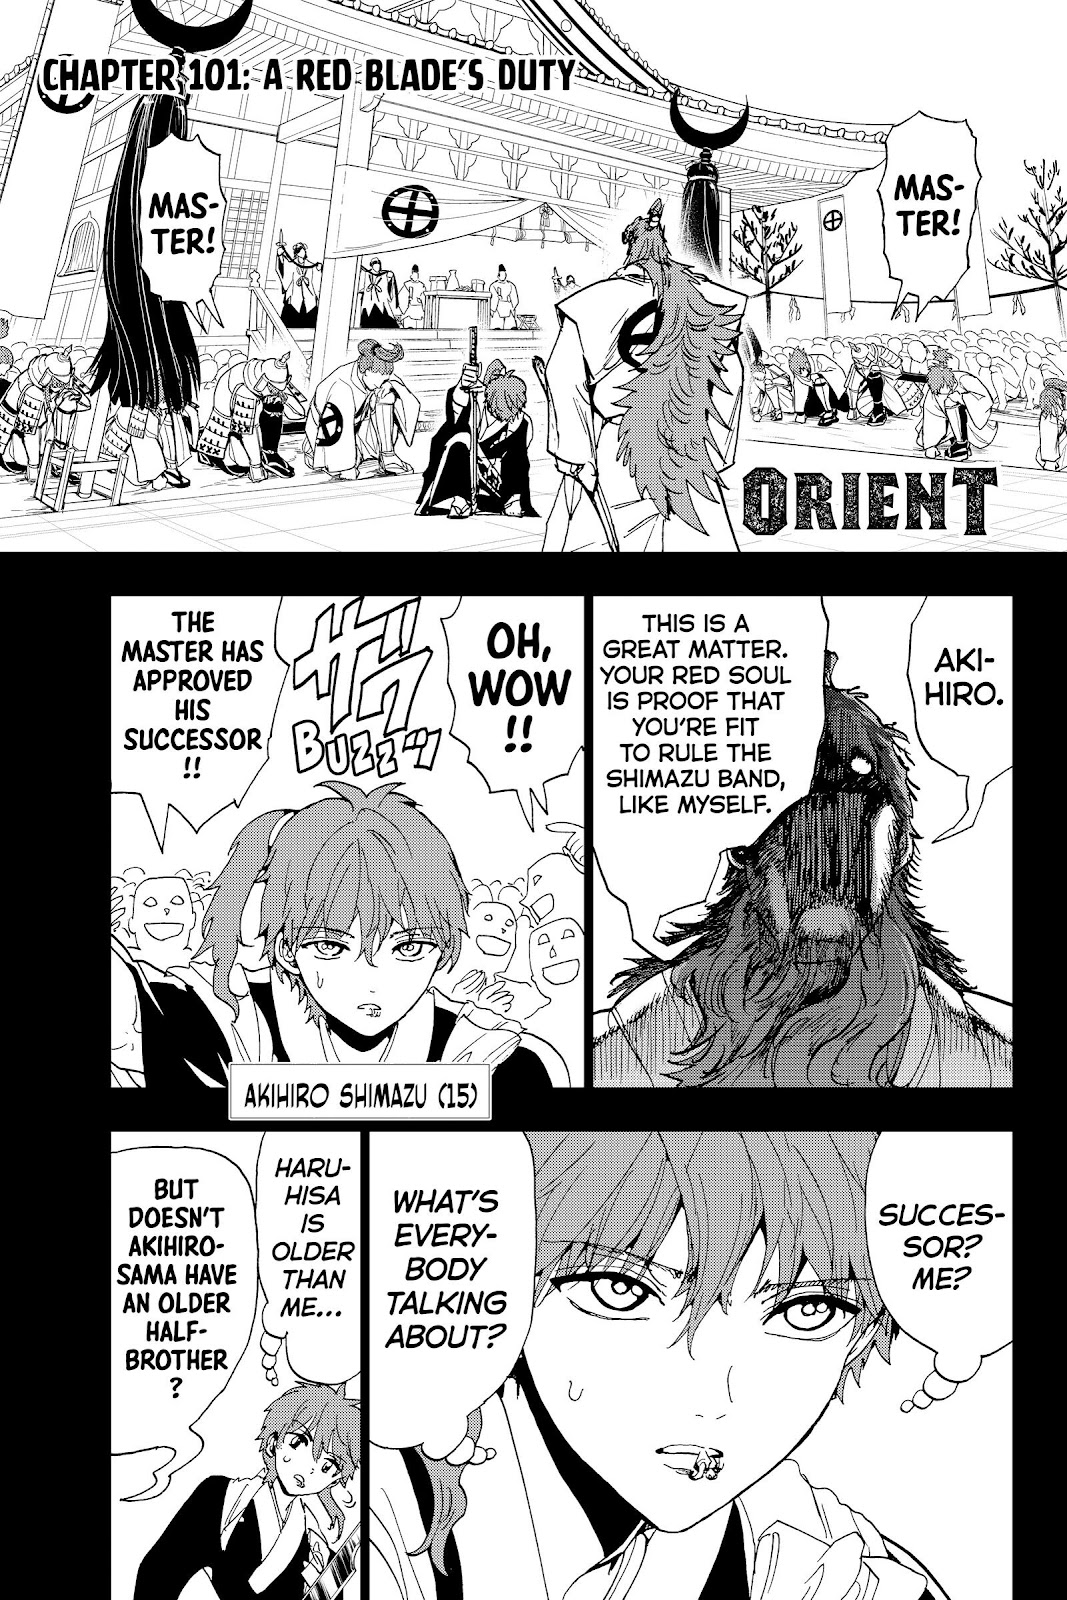 Orient - Chapter 101